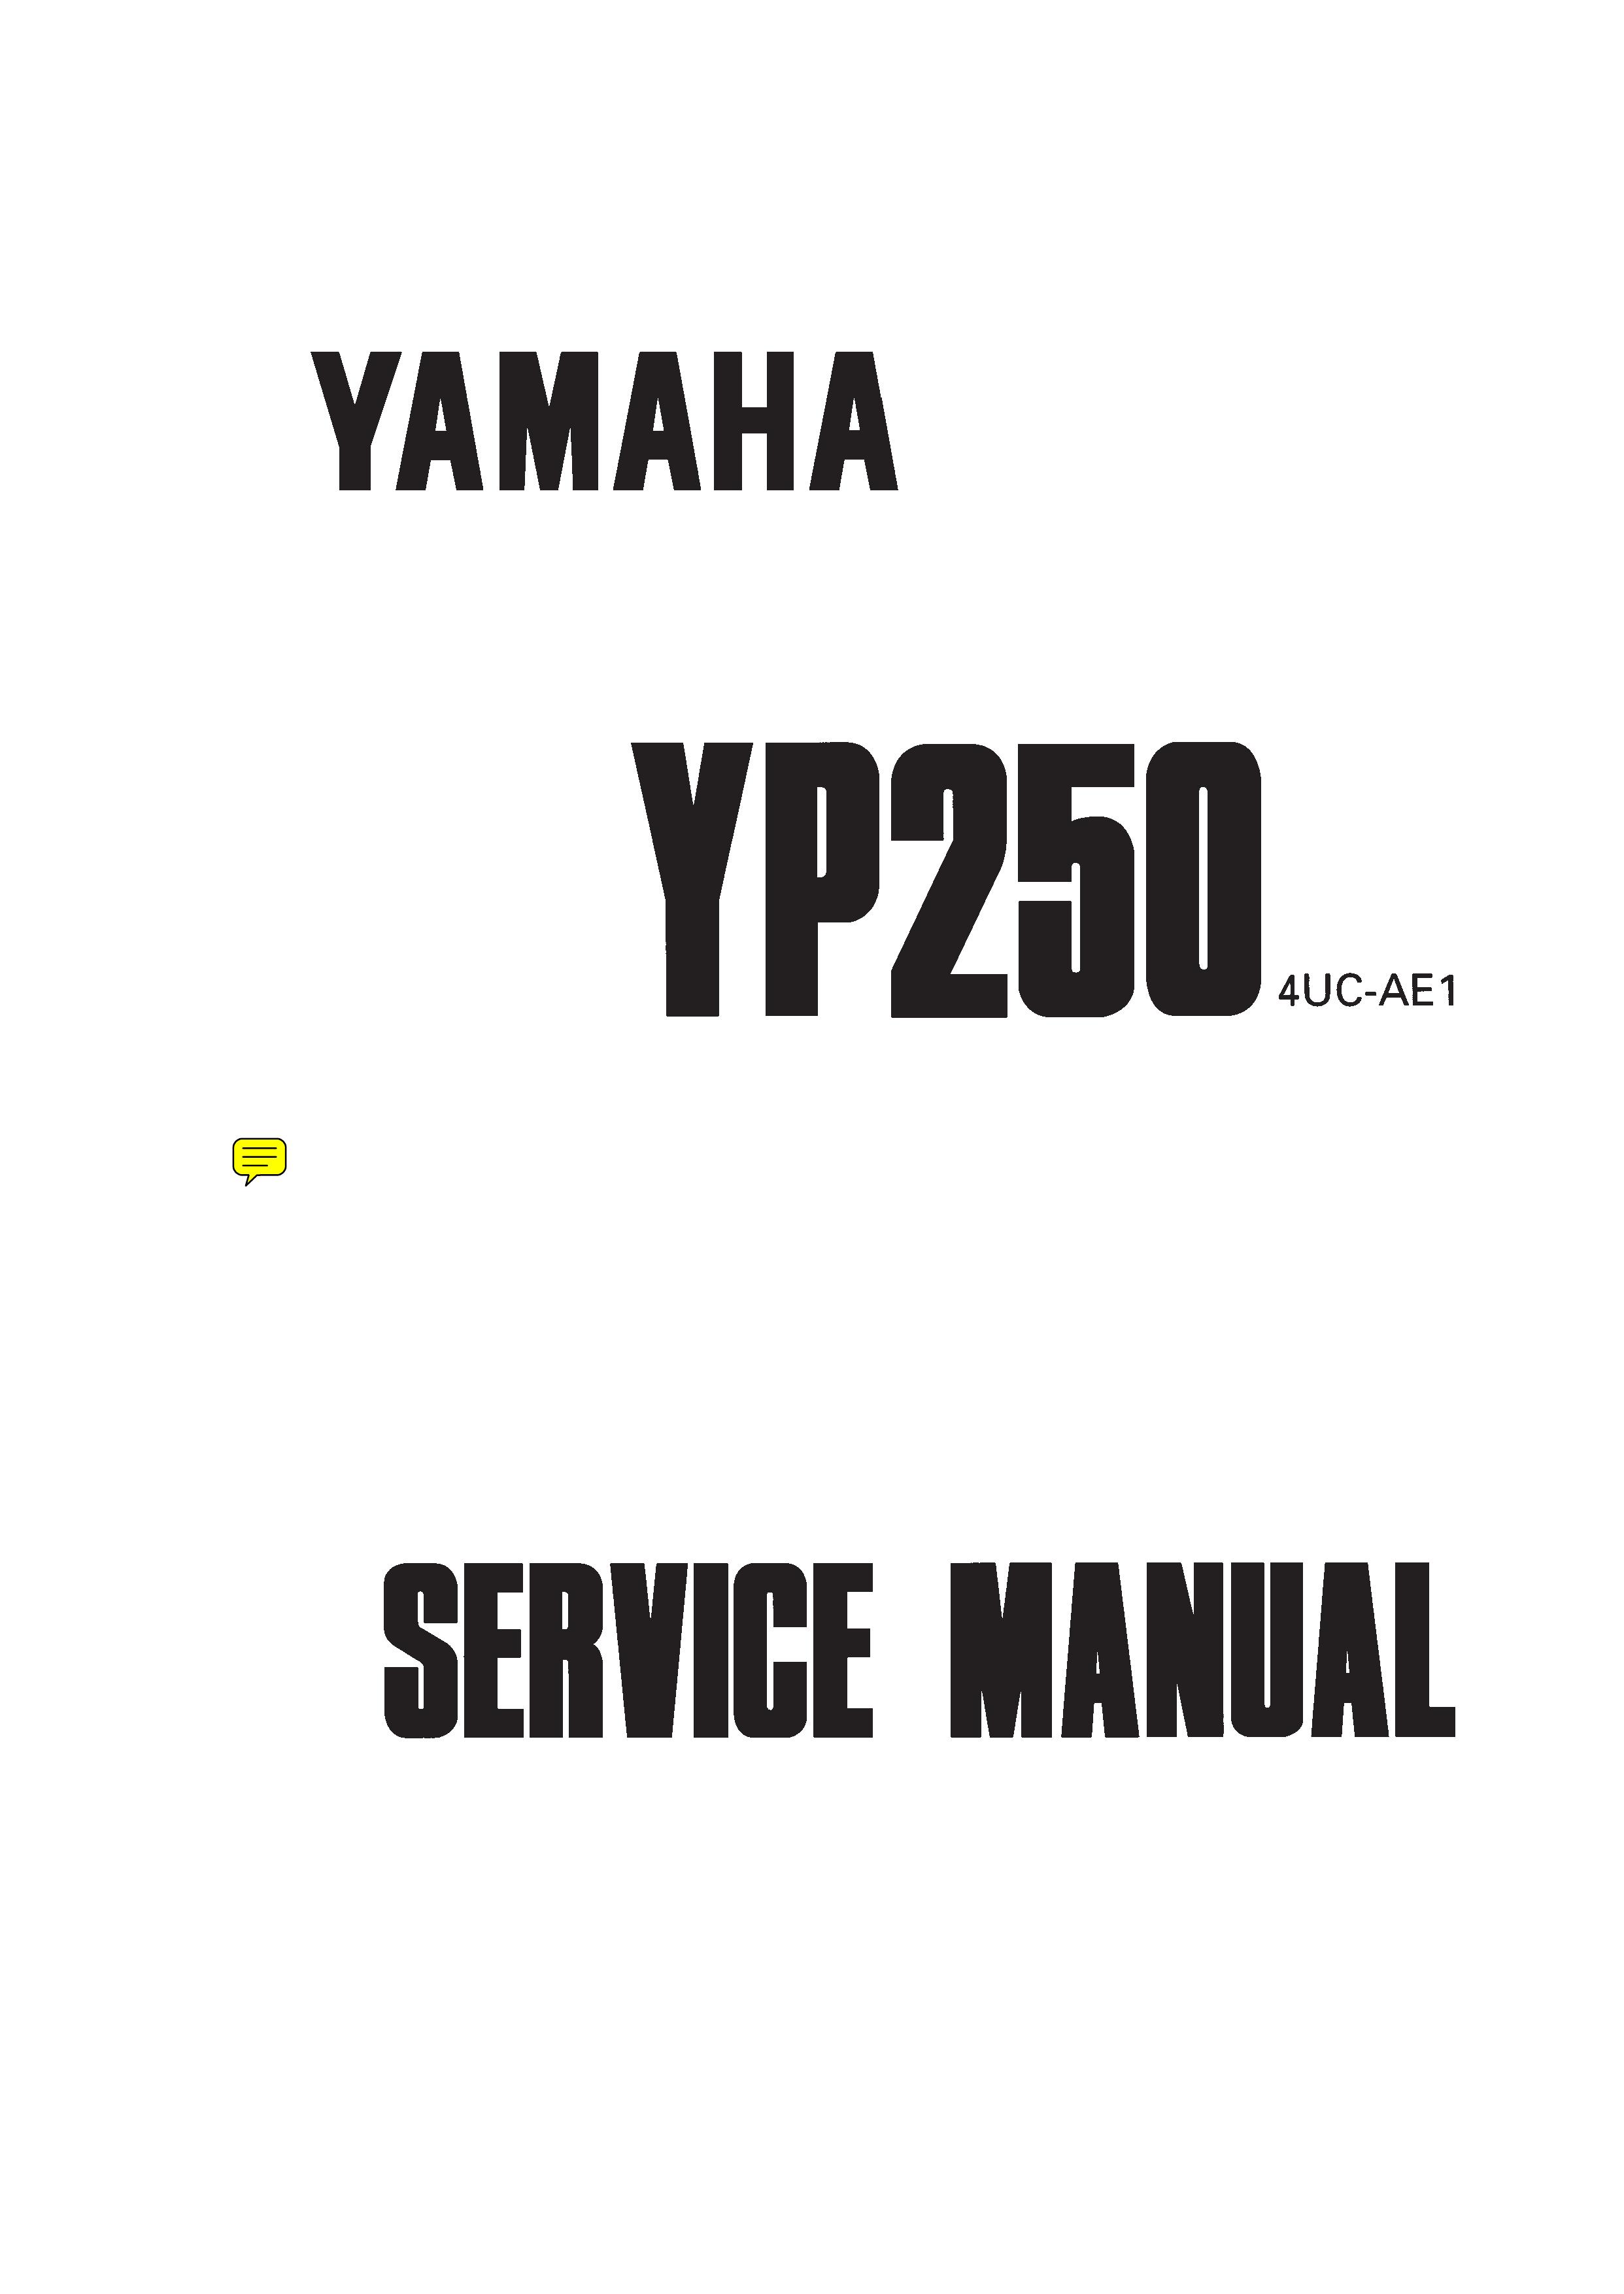 Yamaha YP250 Mobility Scooter User Manual